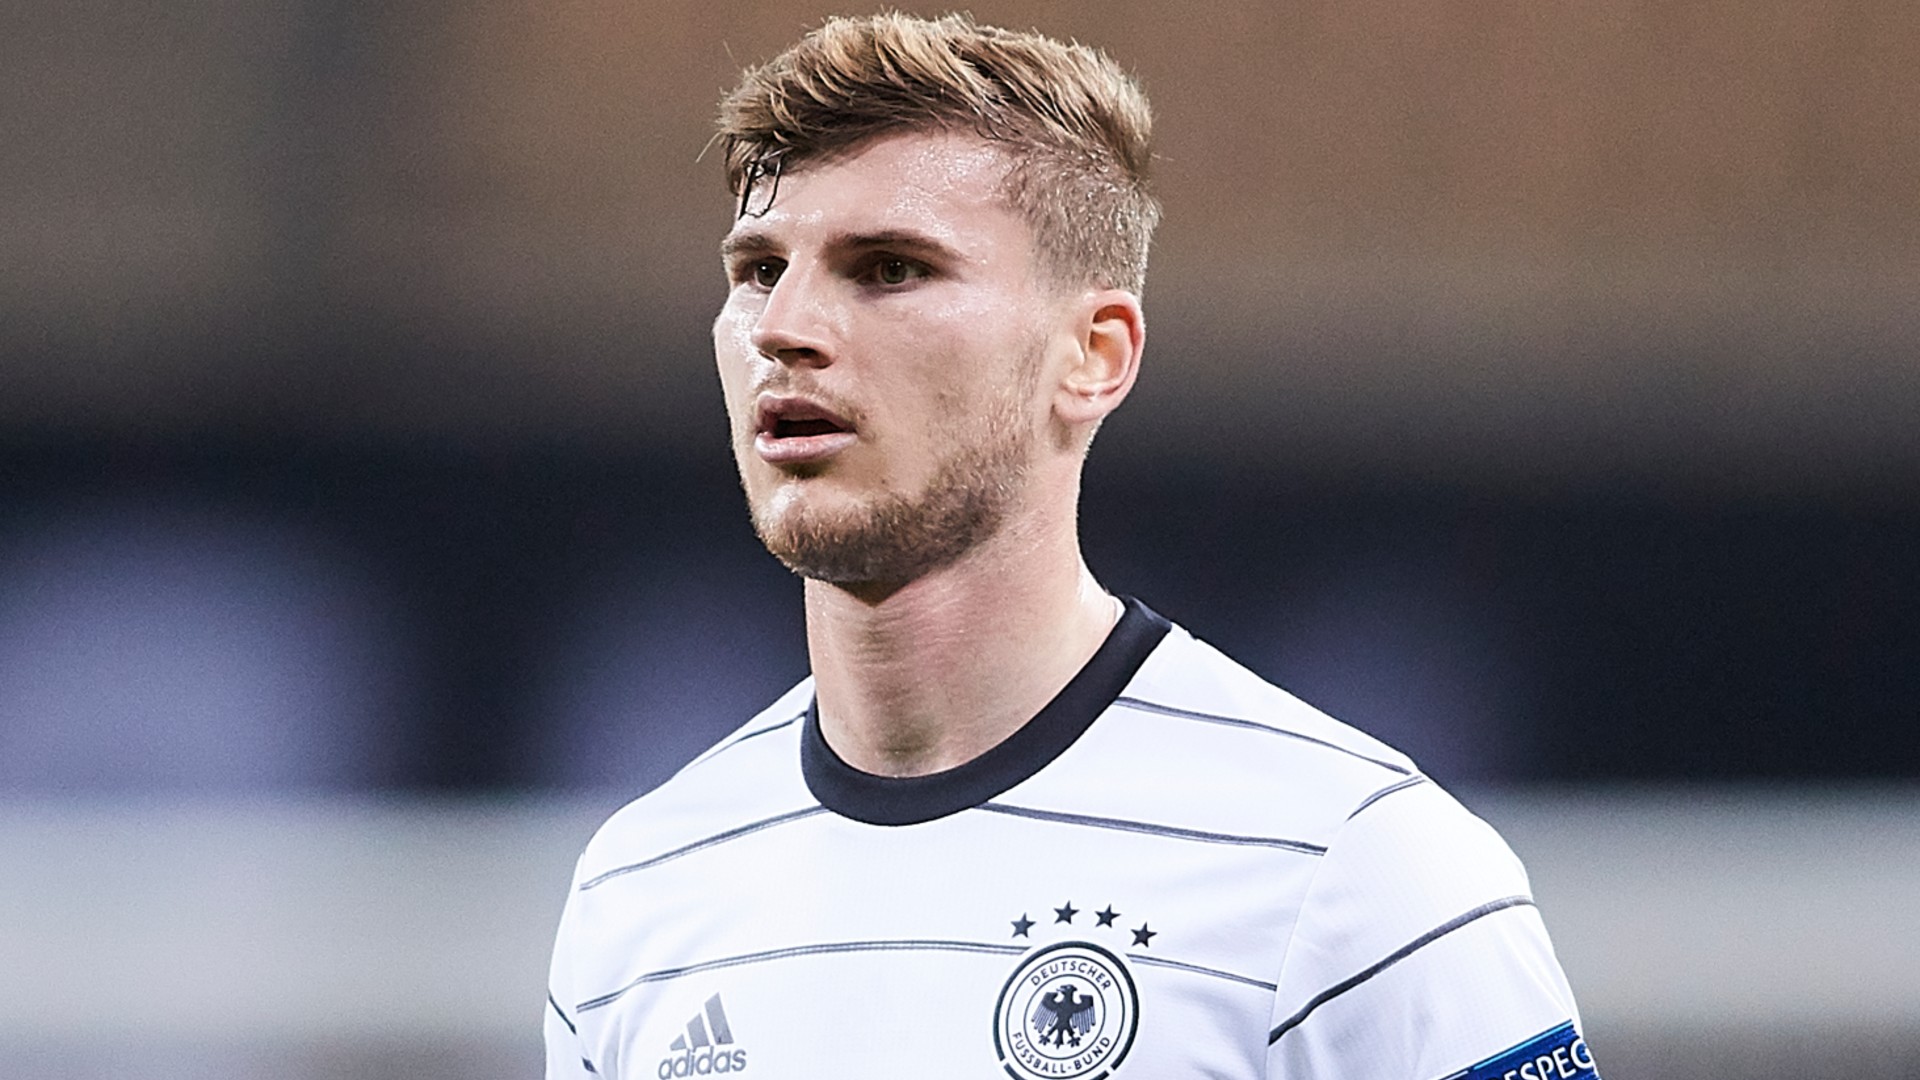 Werner 'will show who he really is' at Euro 2020 after 'up and down' season at Chelsea, says Boateng